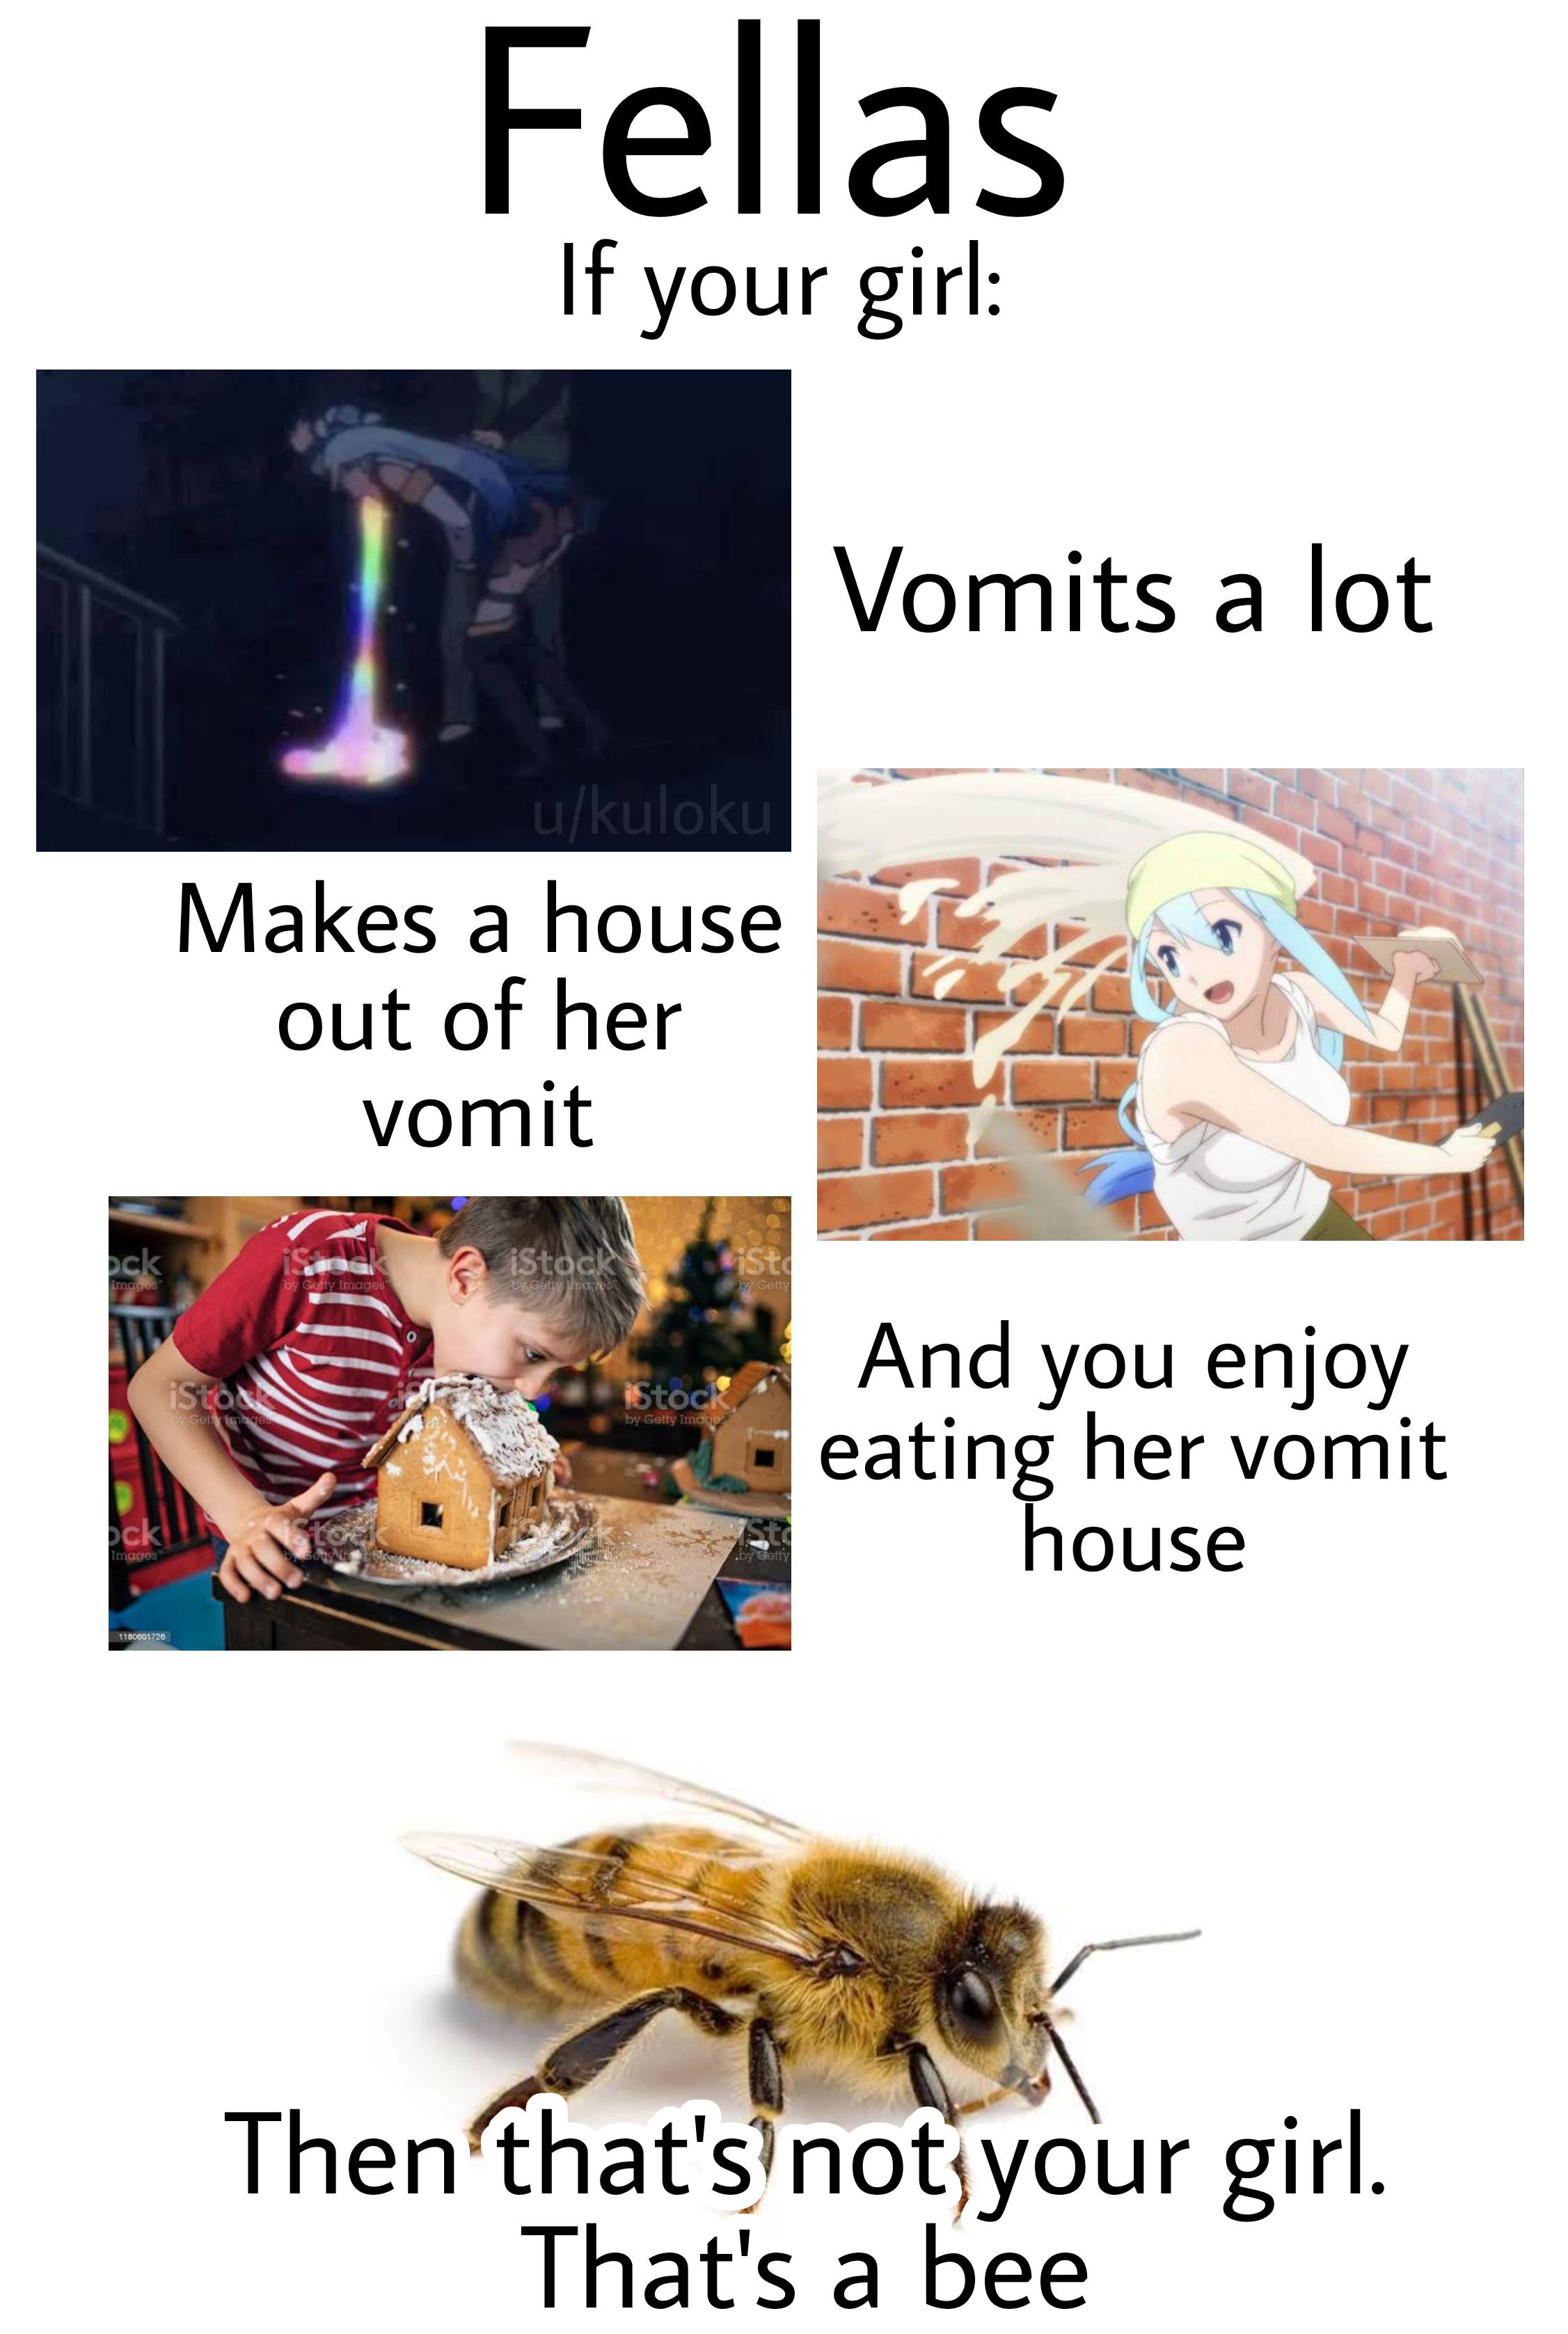 pet - Fellas If your girl Vomits a lot Makes a house out of her vomit And you enjoy eating her vomit house Then that's not your girl. That's a bee